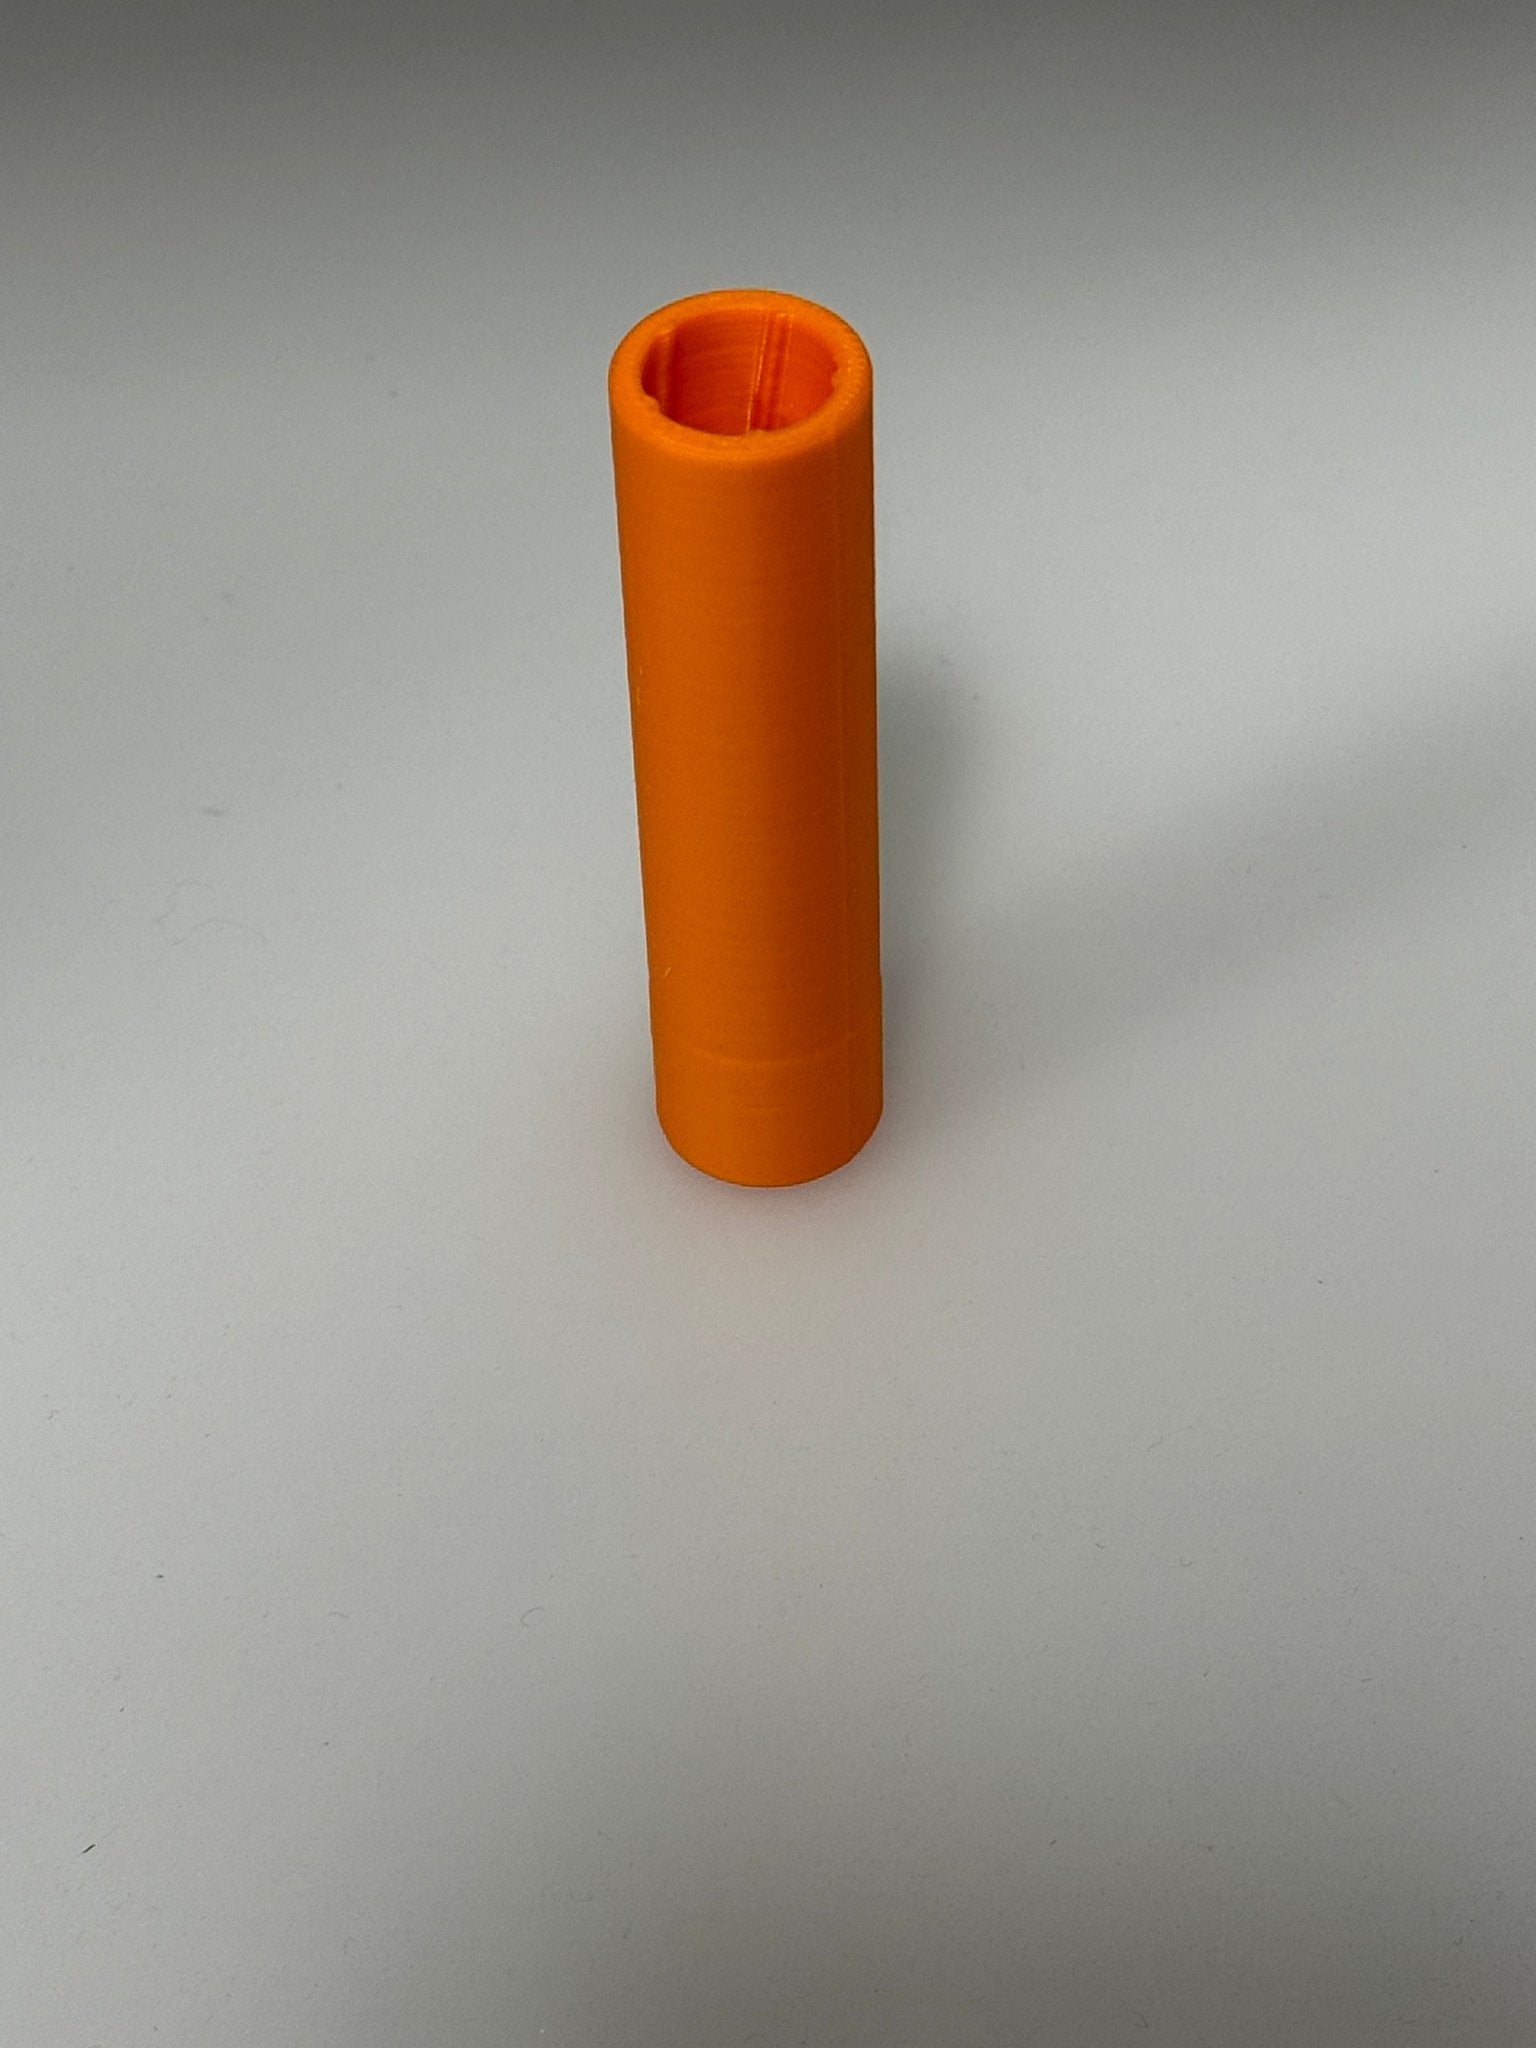 OOD SCAR Barrel for Lynx and other Dart Blasters with 16mm OD Barrel - West3D 3D Printing Supplies - Worker